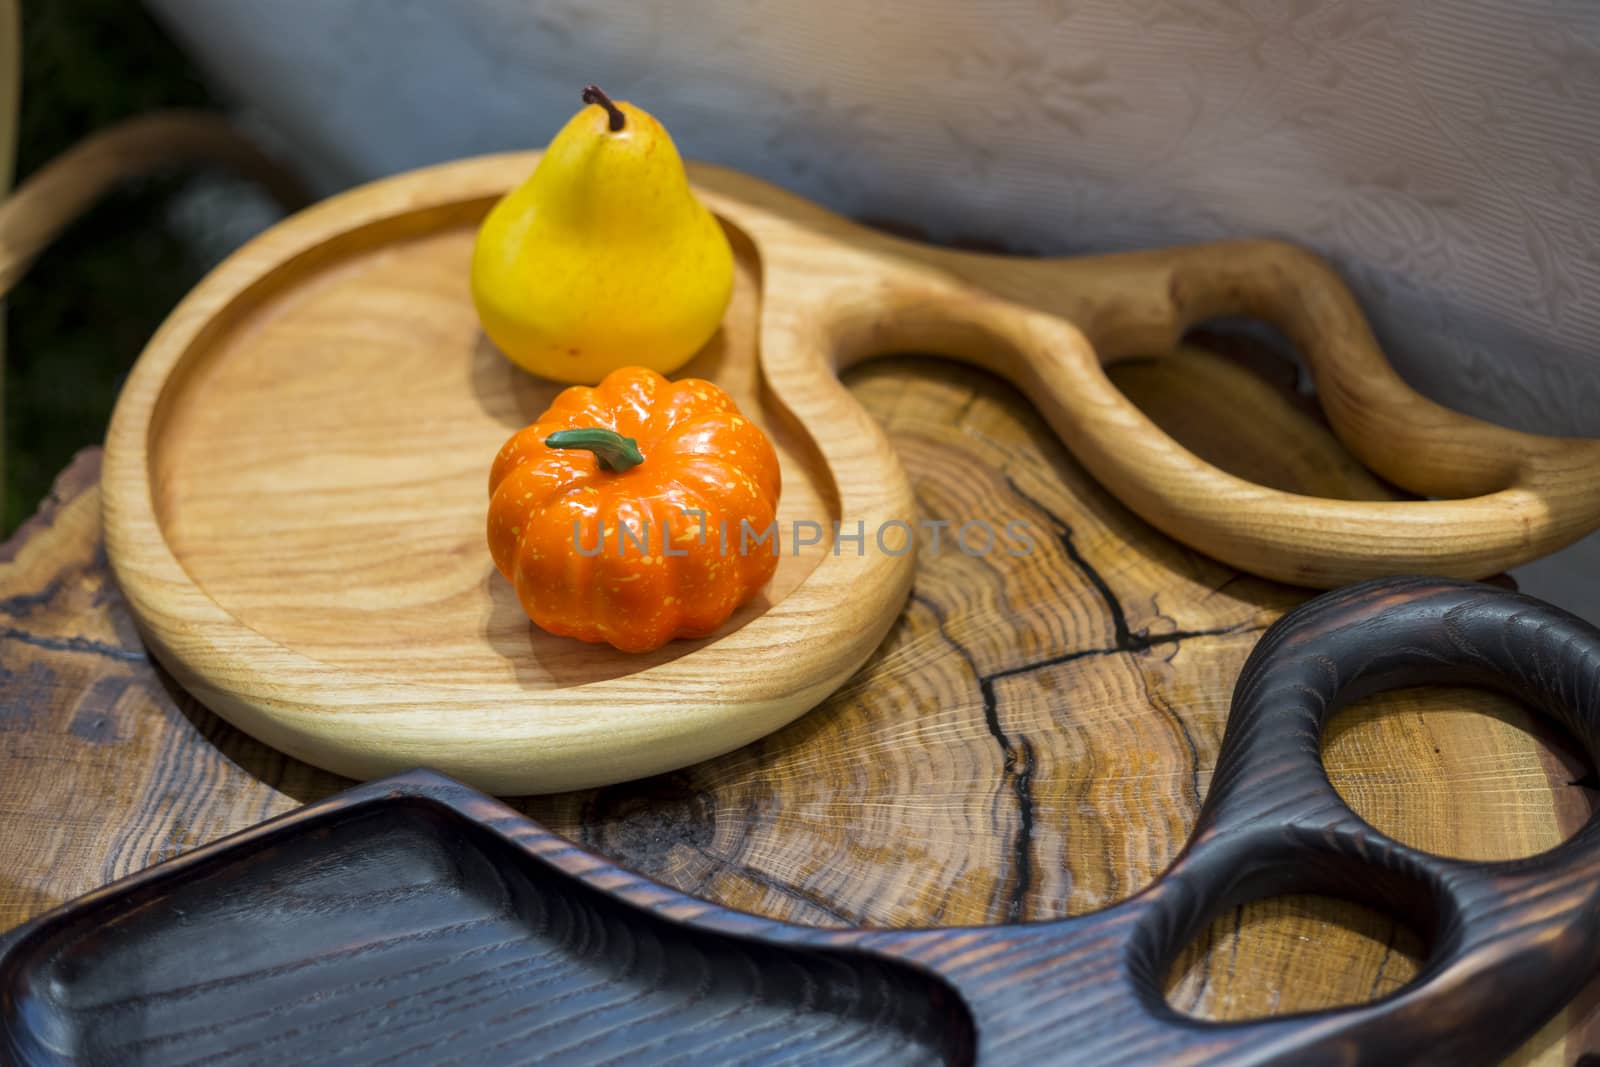 .Decorative wooden cutting boards with autumn pumpkin decorations.